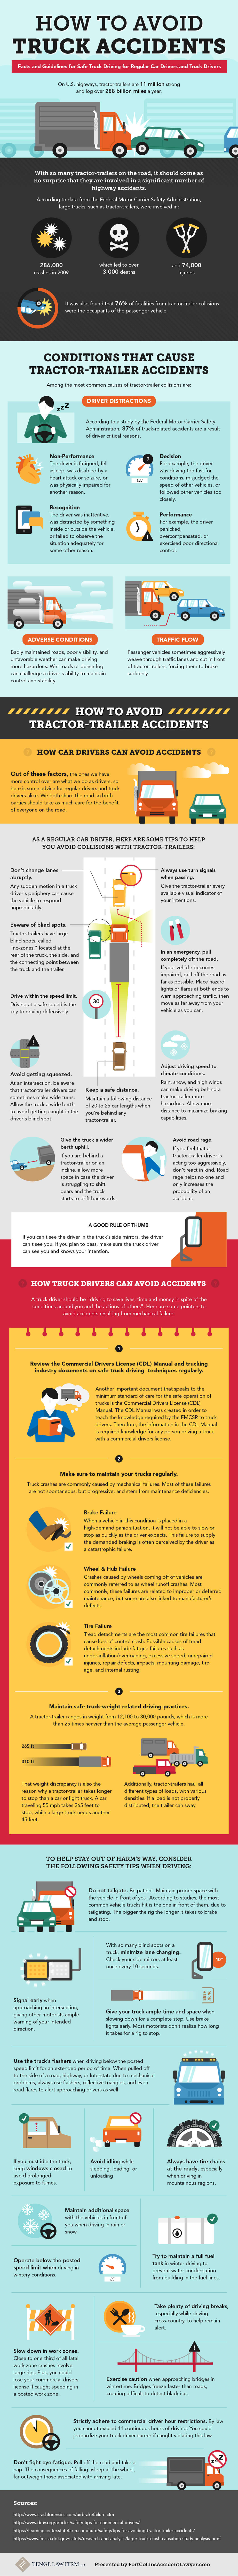 Road Safety Tips